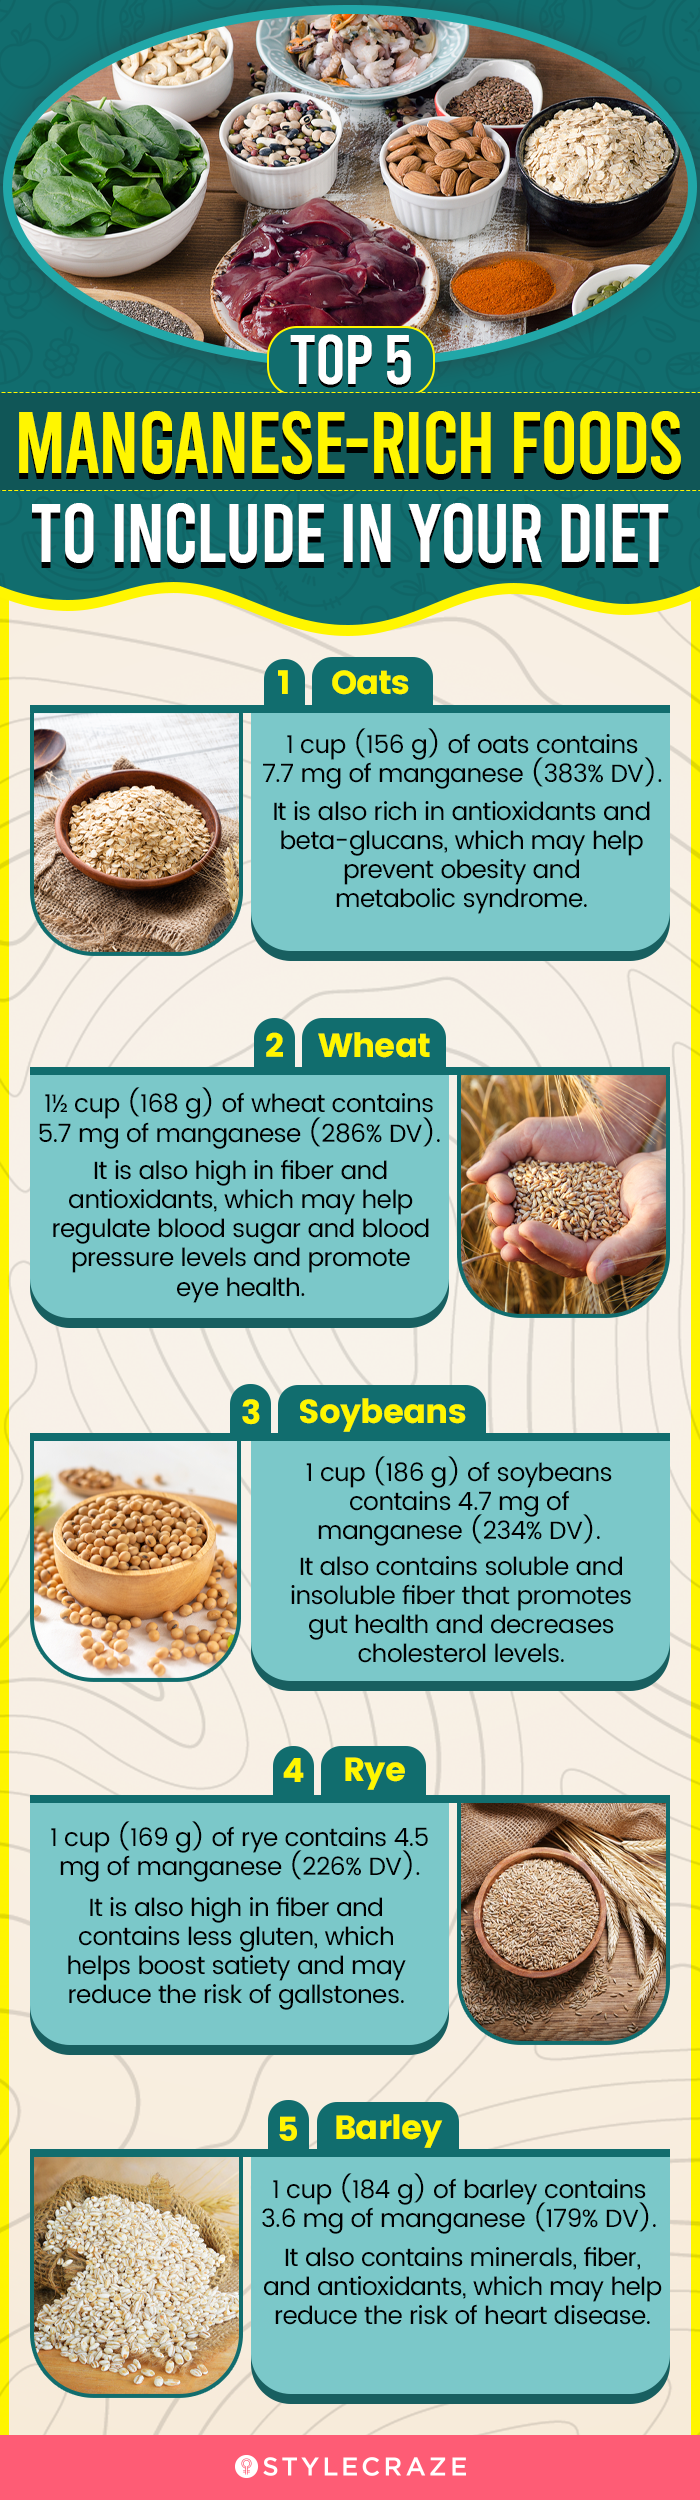 top 5 manganese rich foods to include in your diet (infographic)